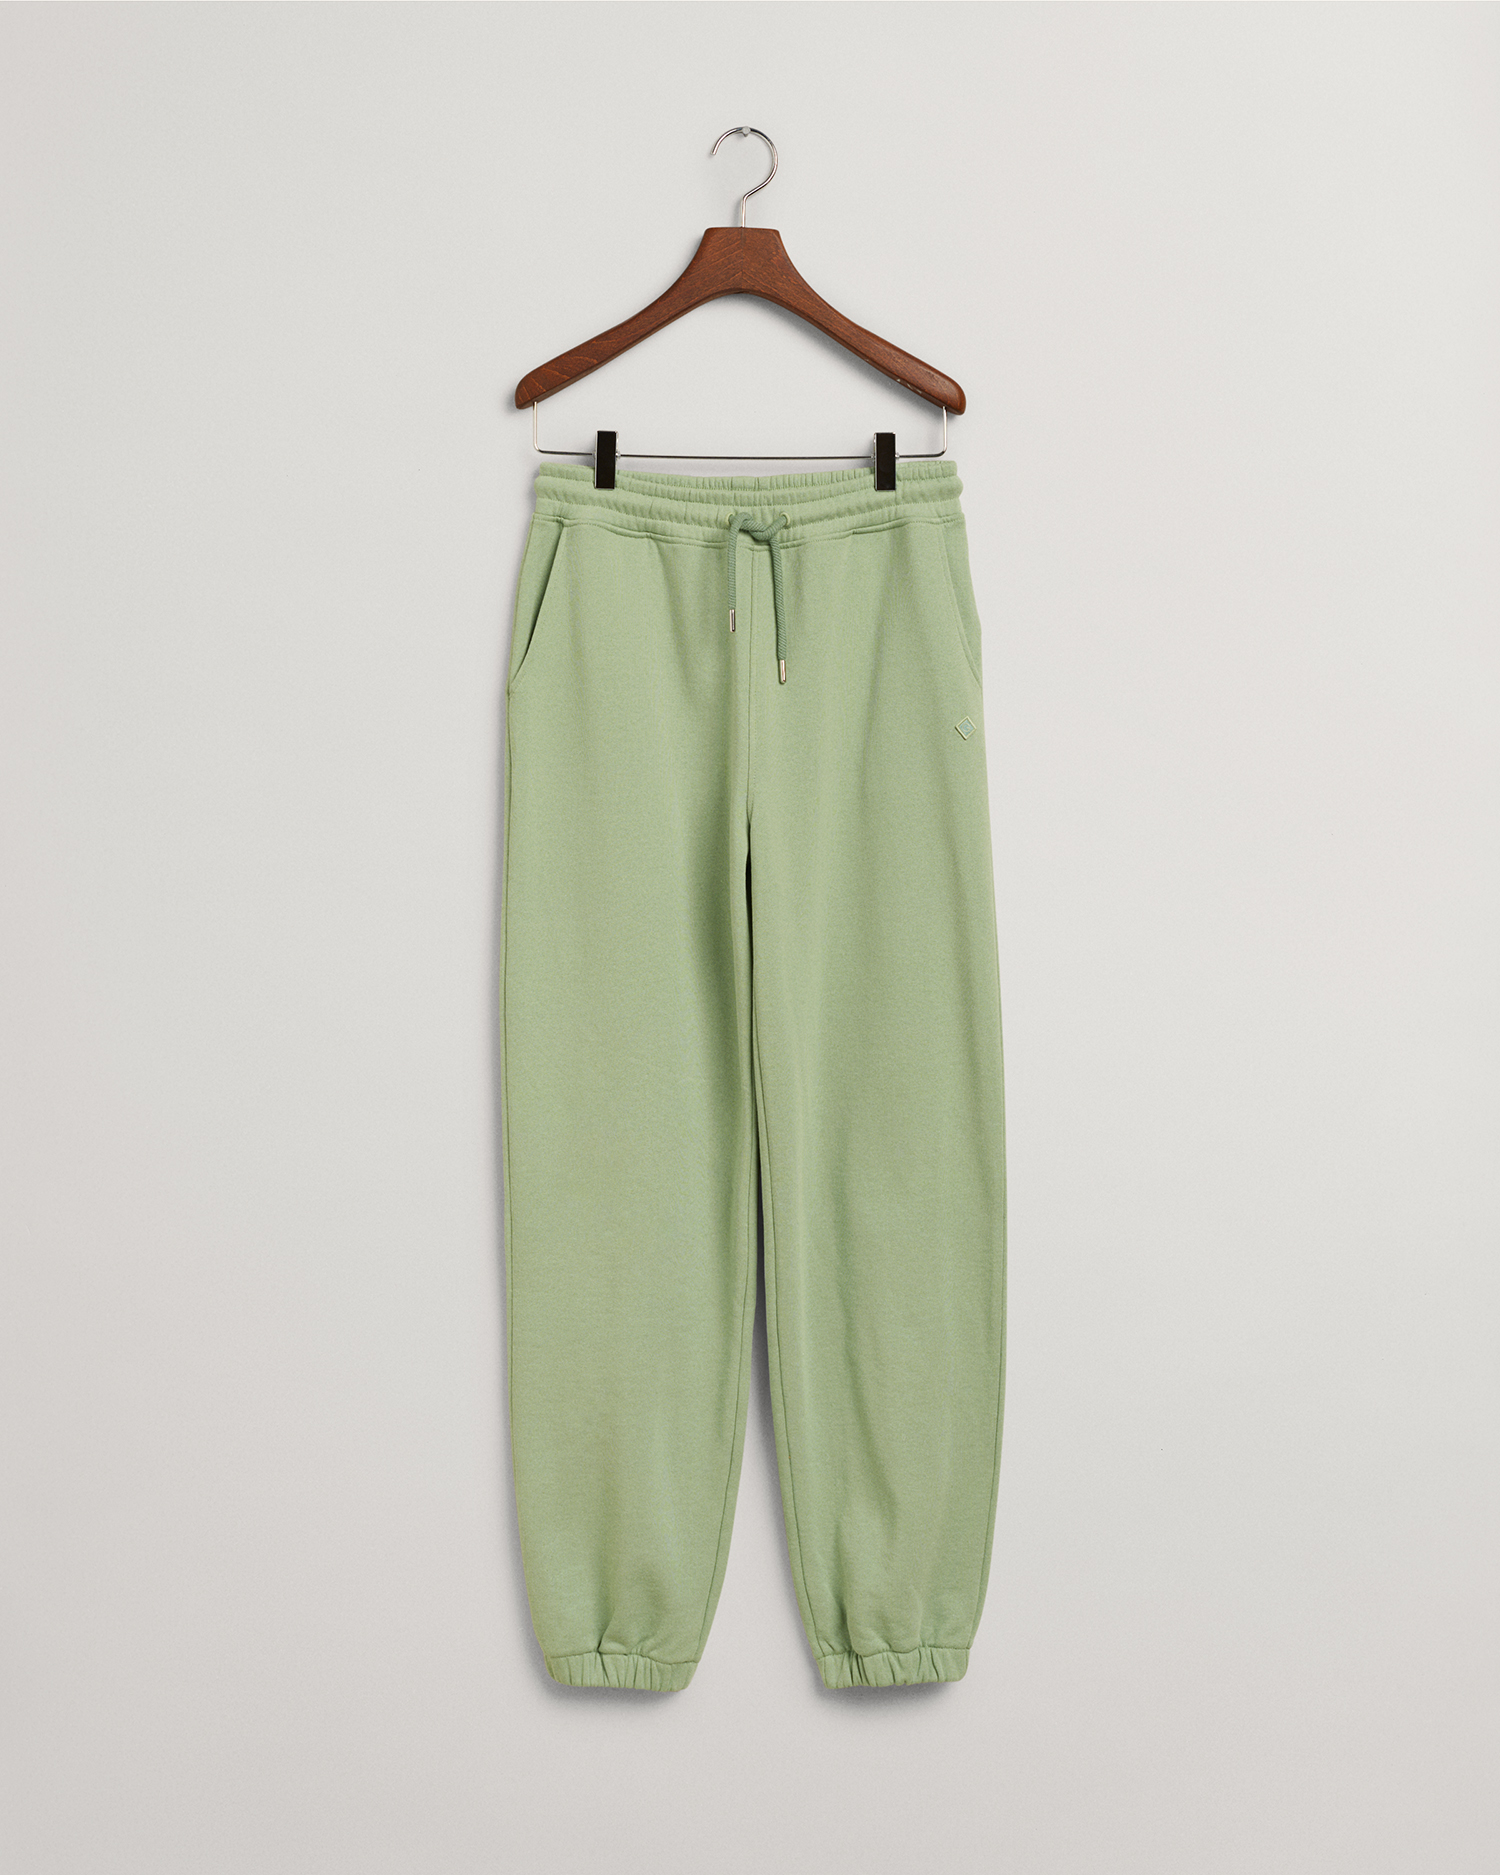 Relaxed Fit Icon G Essential Sweatpants